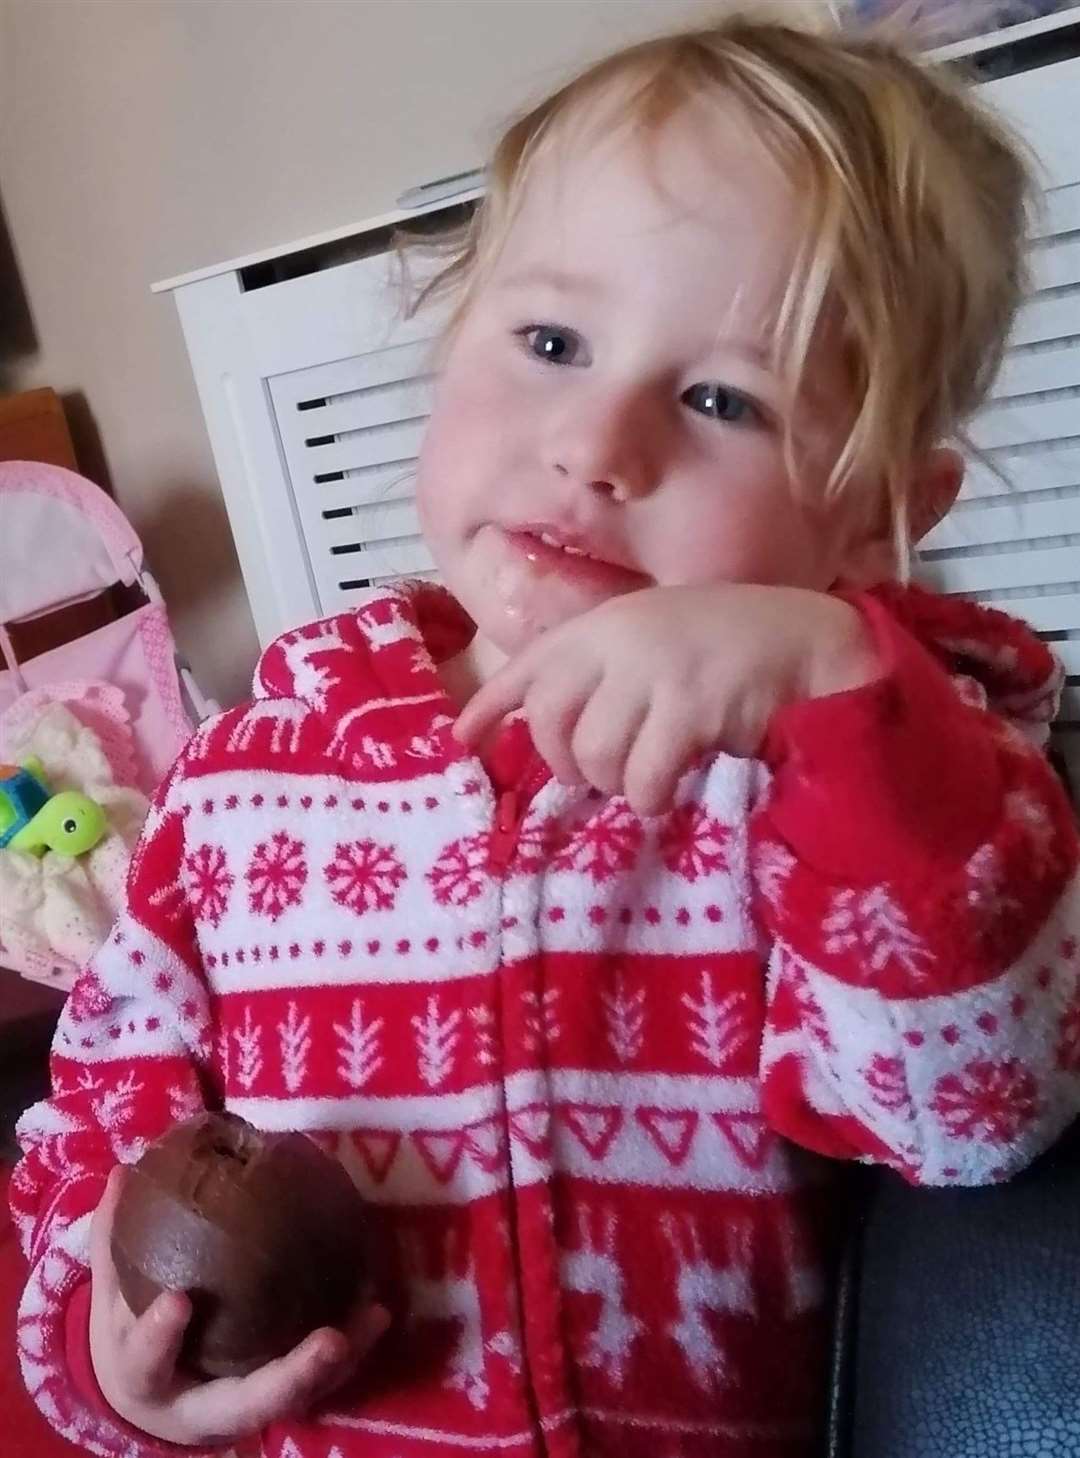 Two-year-old Lola James suffered a ‘catastrophic’ head injury at her home in Haverfordwest (Family handout/Dyfed-Powys Police/PA)